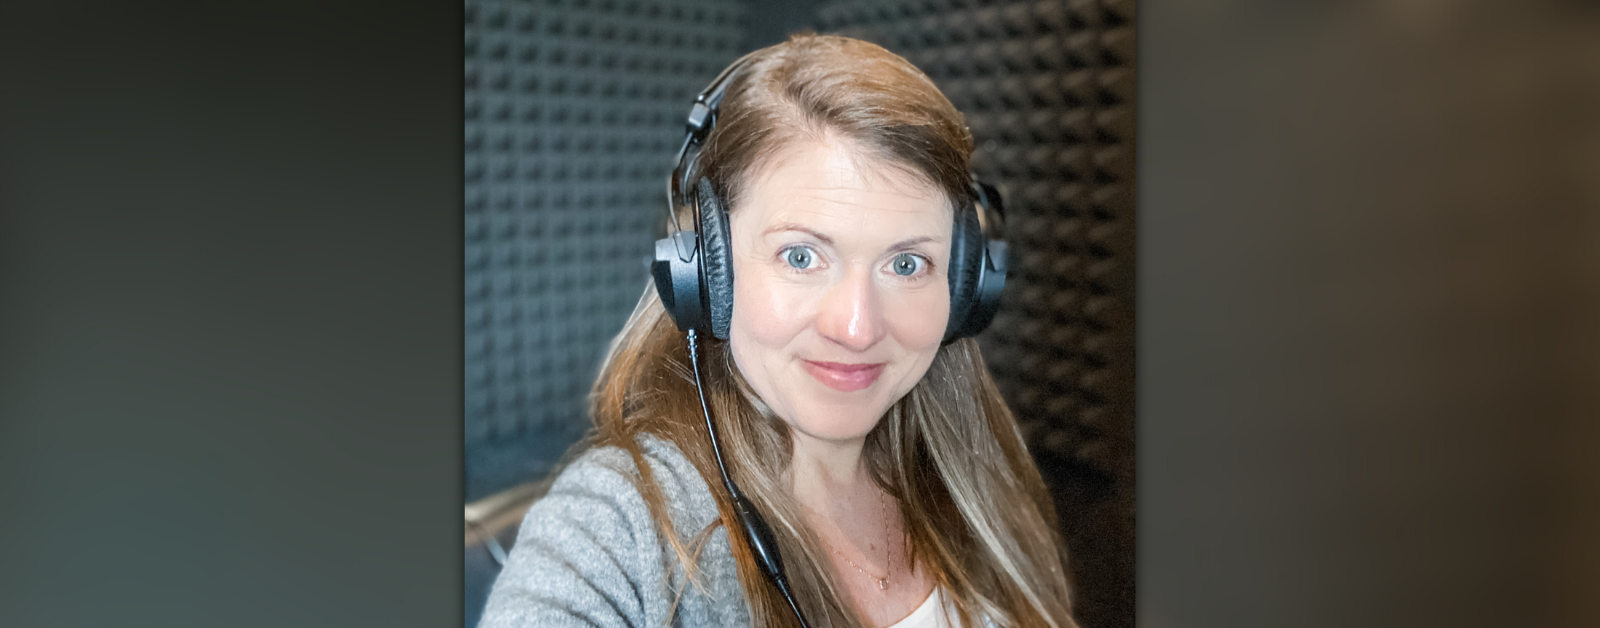 Amy Julia takes a selfie in a padded sound room. She is wearing large headphones